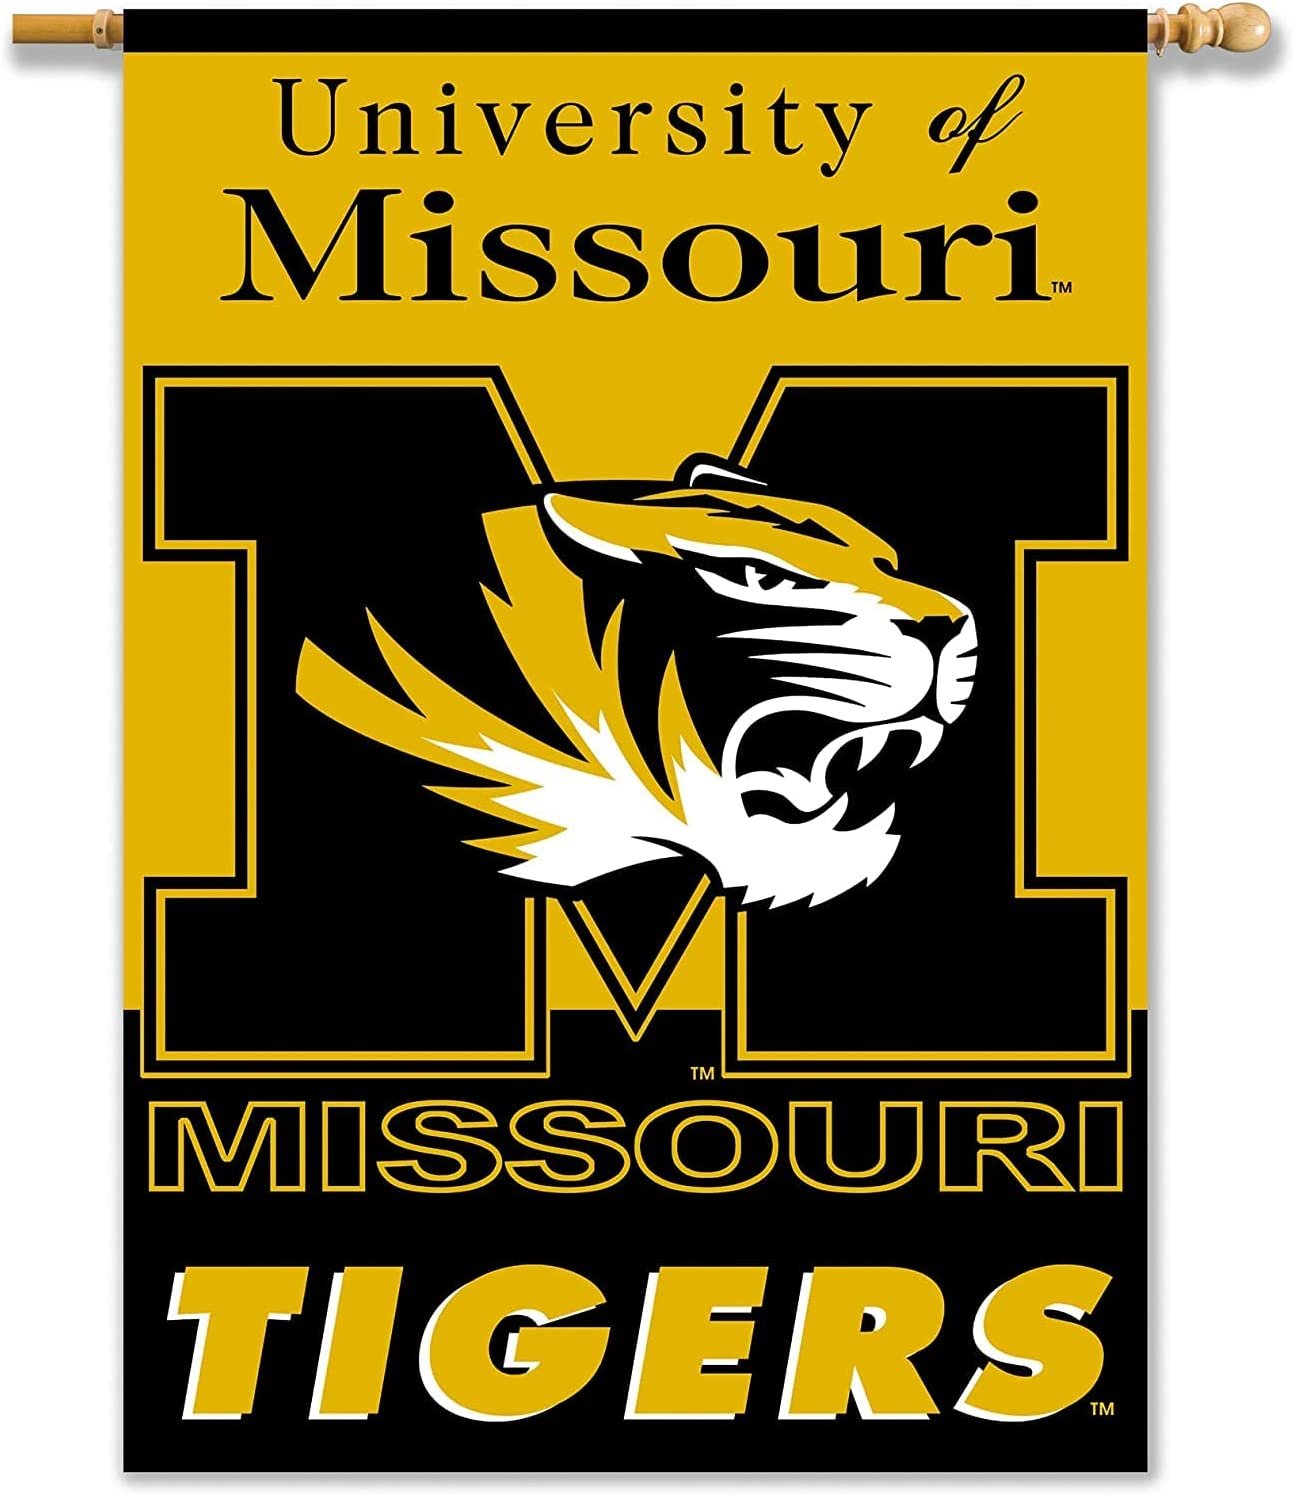 University of Missouri Tigers Premium 2-Sided 28x40 Inch Banner Flag with Pole Sleeve